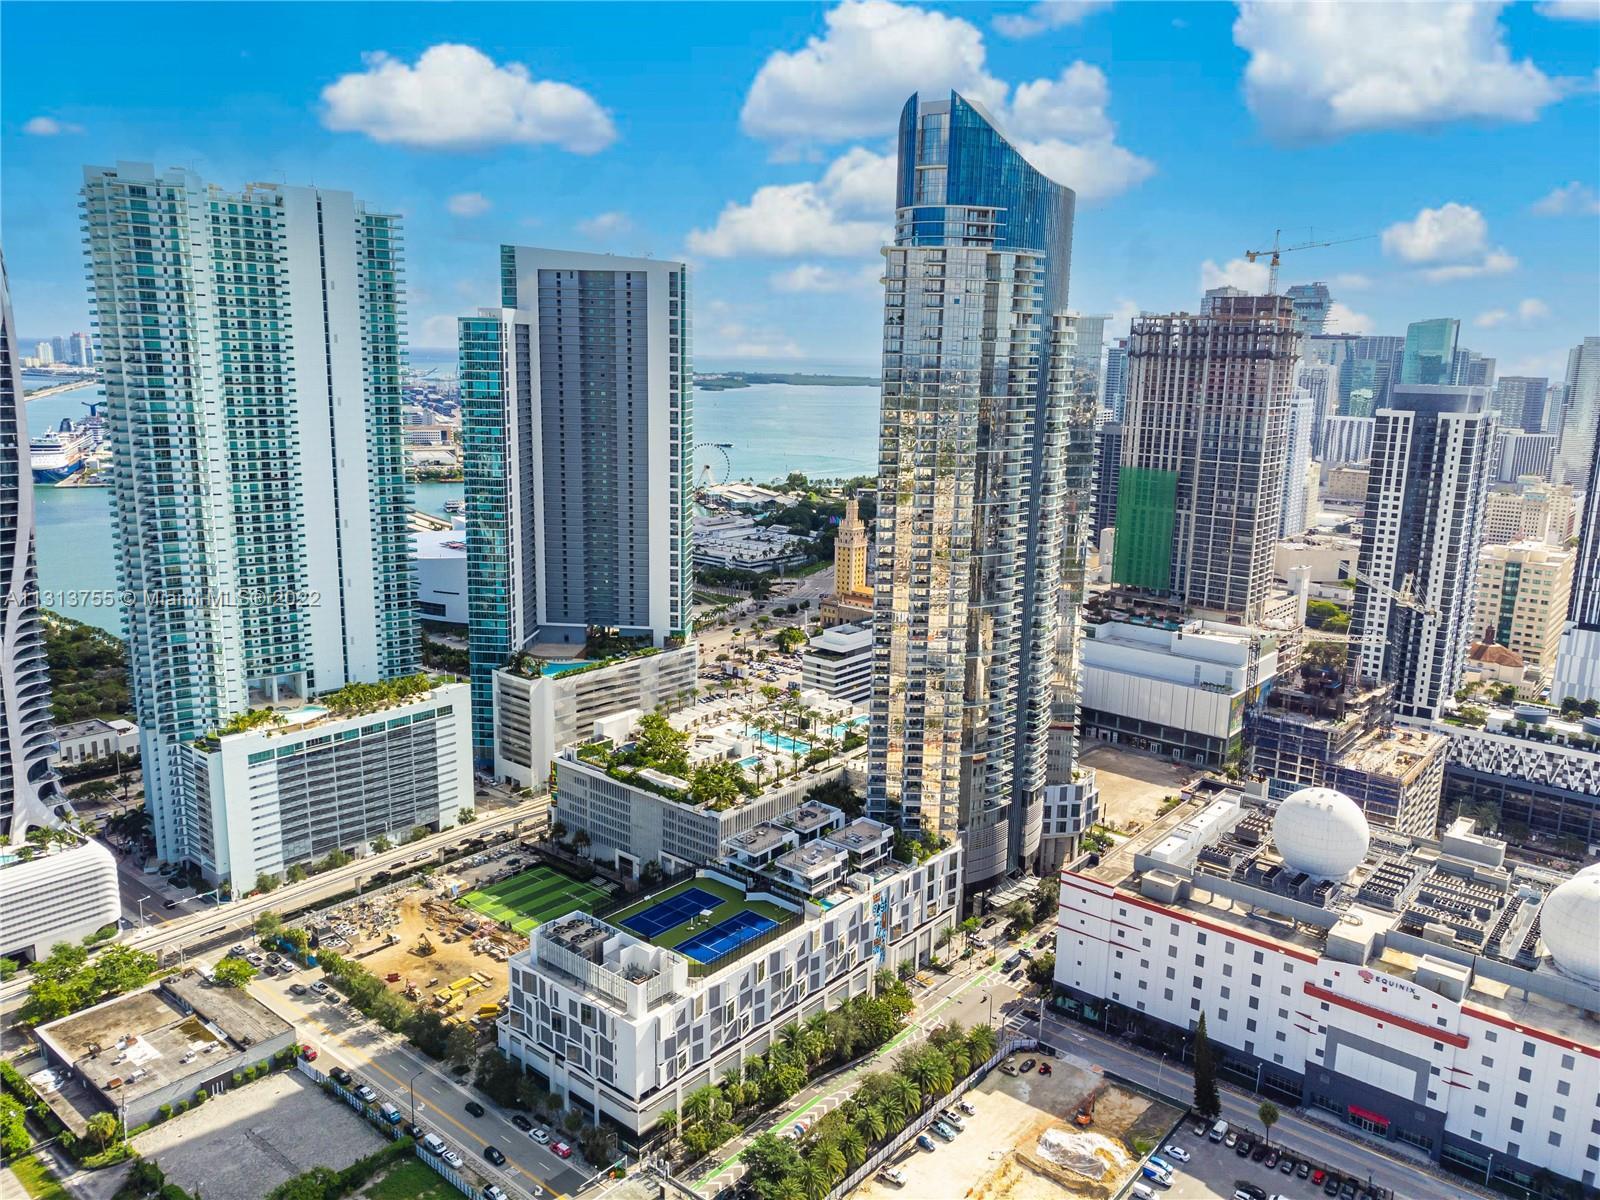 PARAMOUNT is an iconic, high-end urban living experience in the center of Miami WorldCenter, the sec